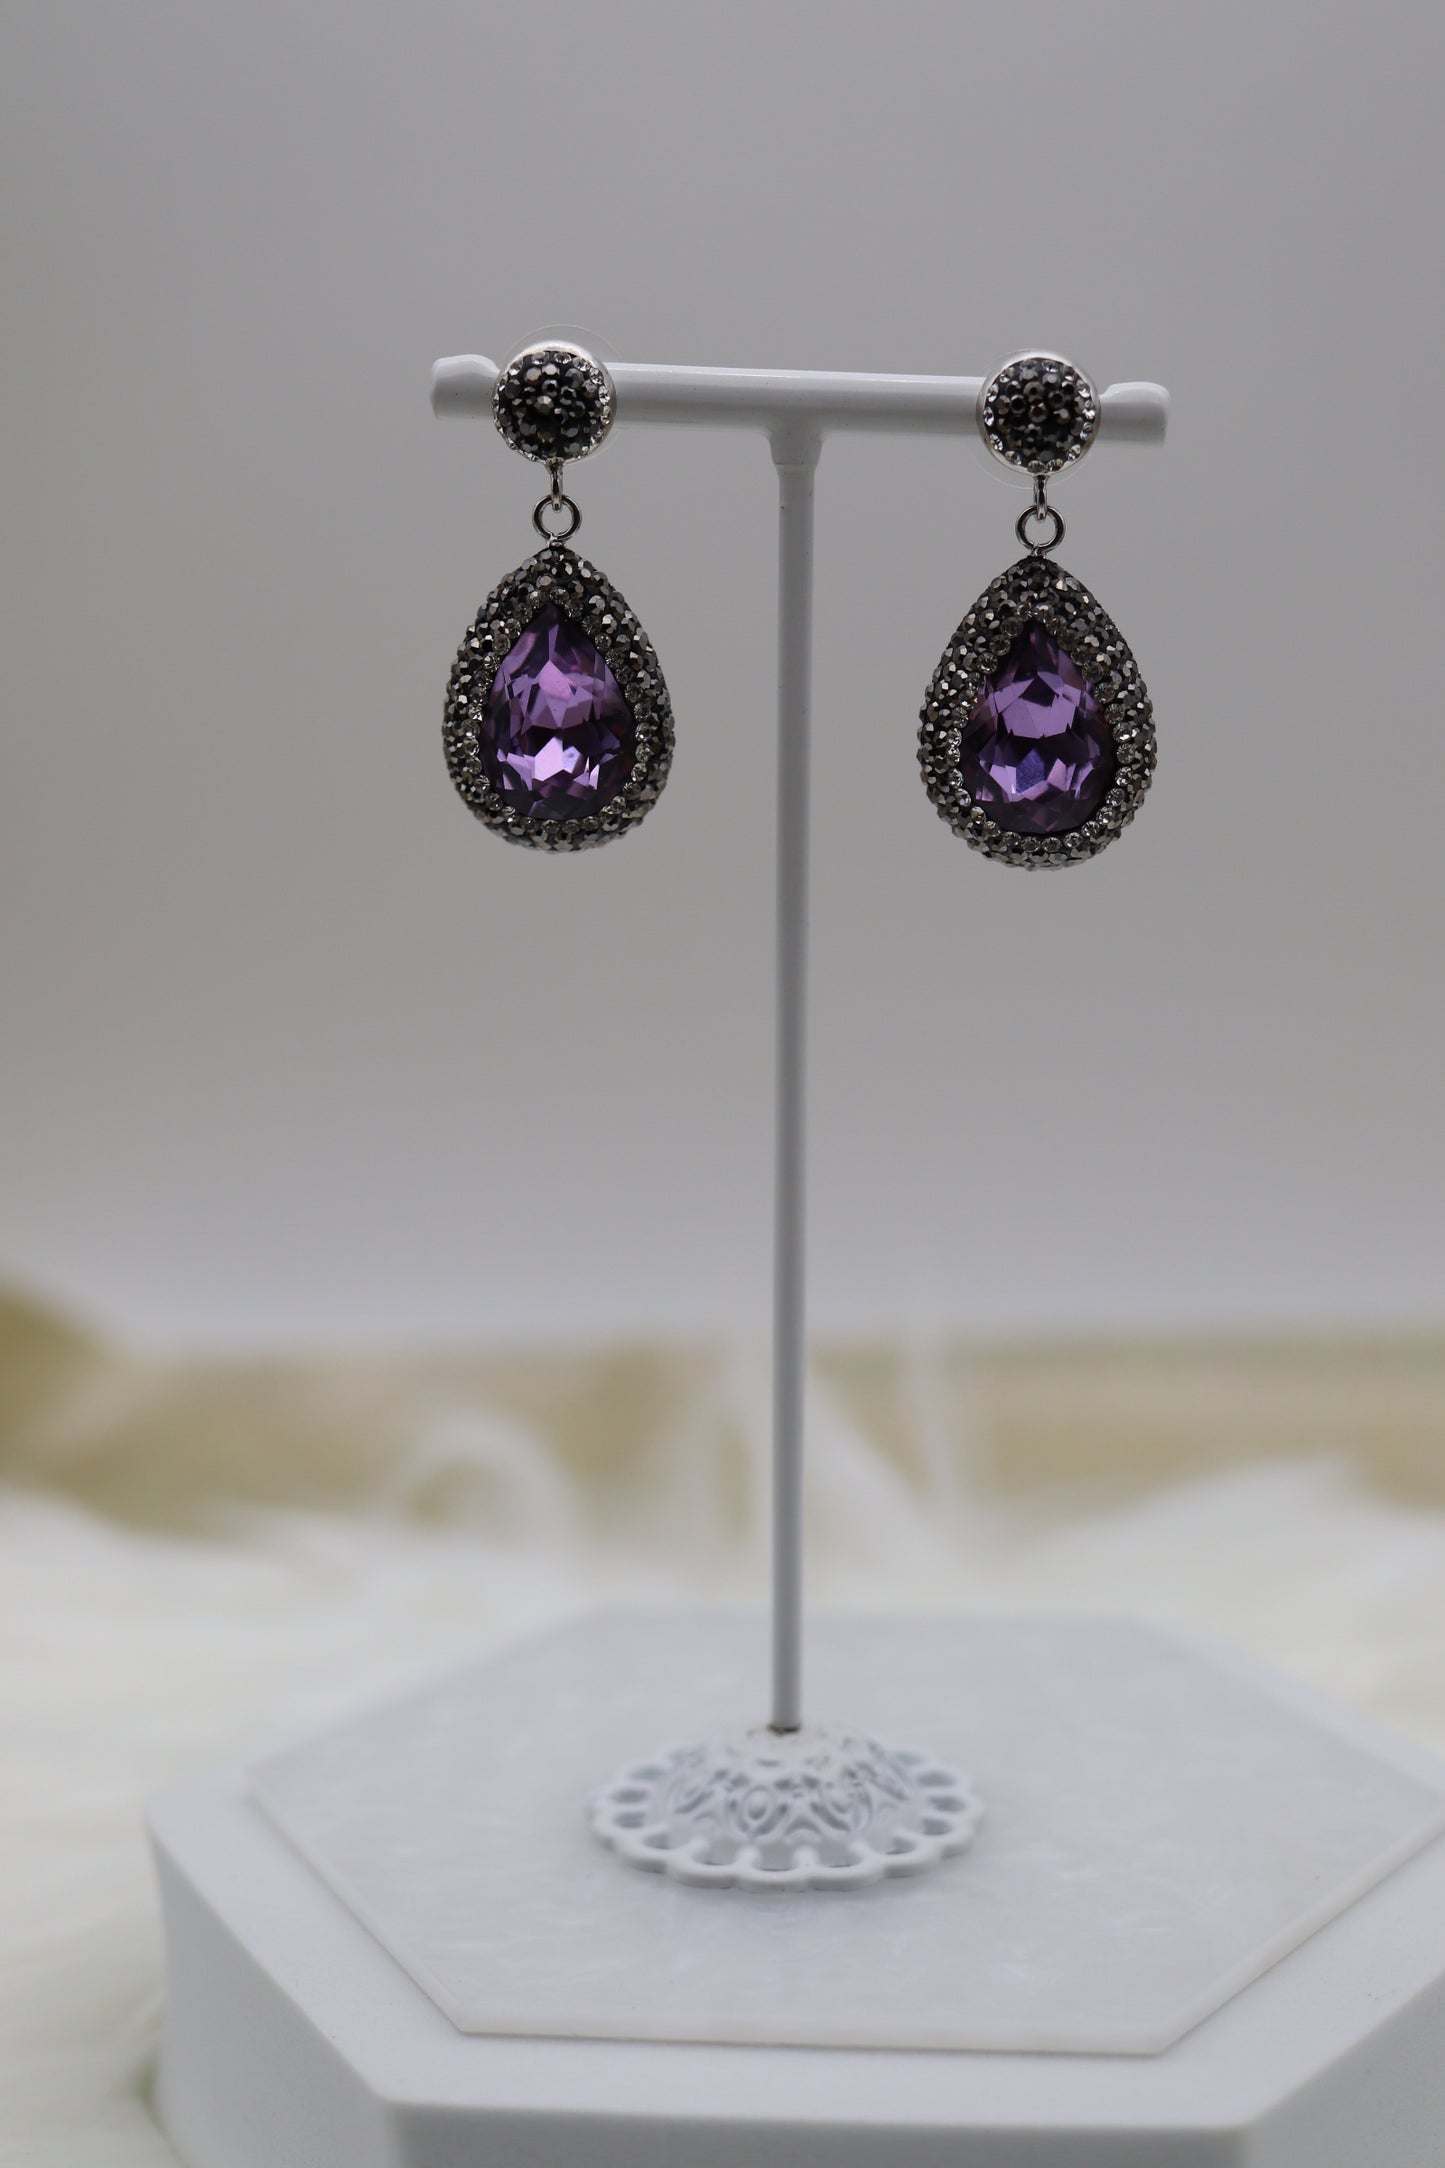 Matching Necklace and Earrings With Pear Shaped Amethyst Faceted CZ Stones